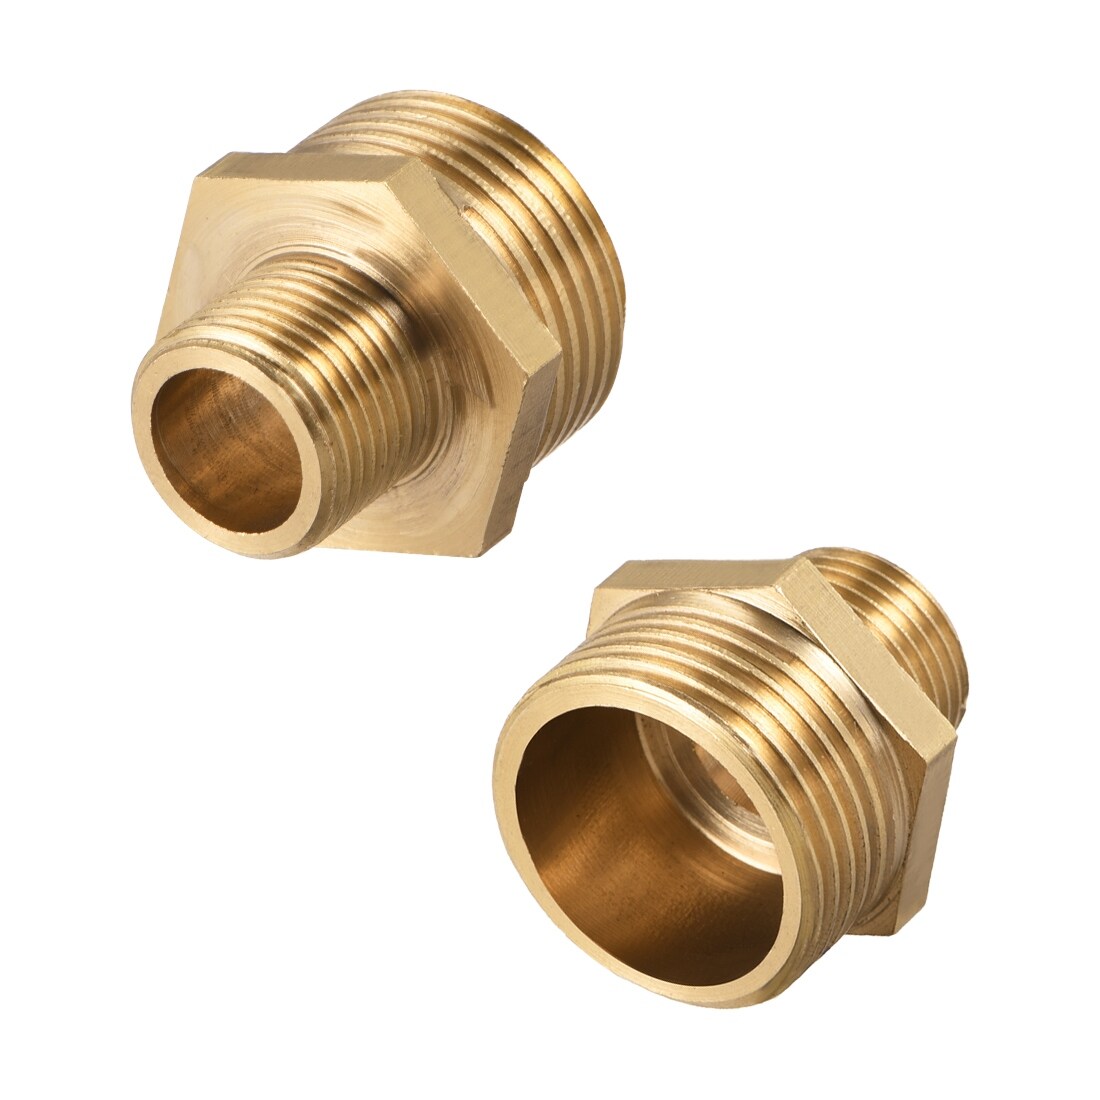 Brass Pipe Fitting Reducing Hex Nipple 3/8"x 3/4" G Male Pipe Brass Fitting - 3/8" to 3/4" G Male